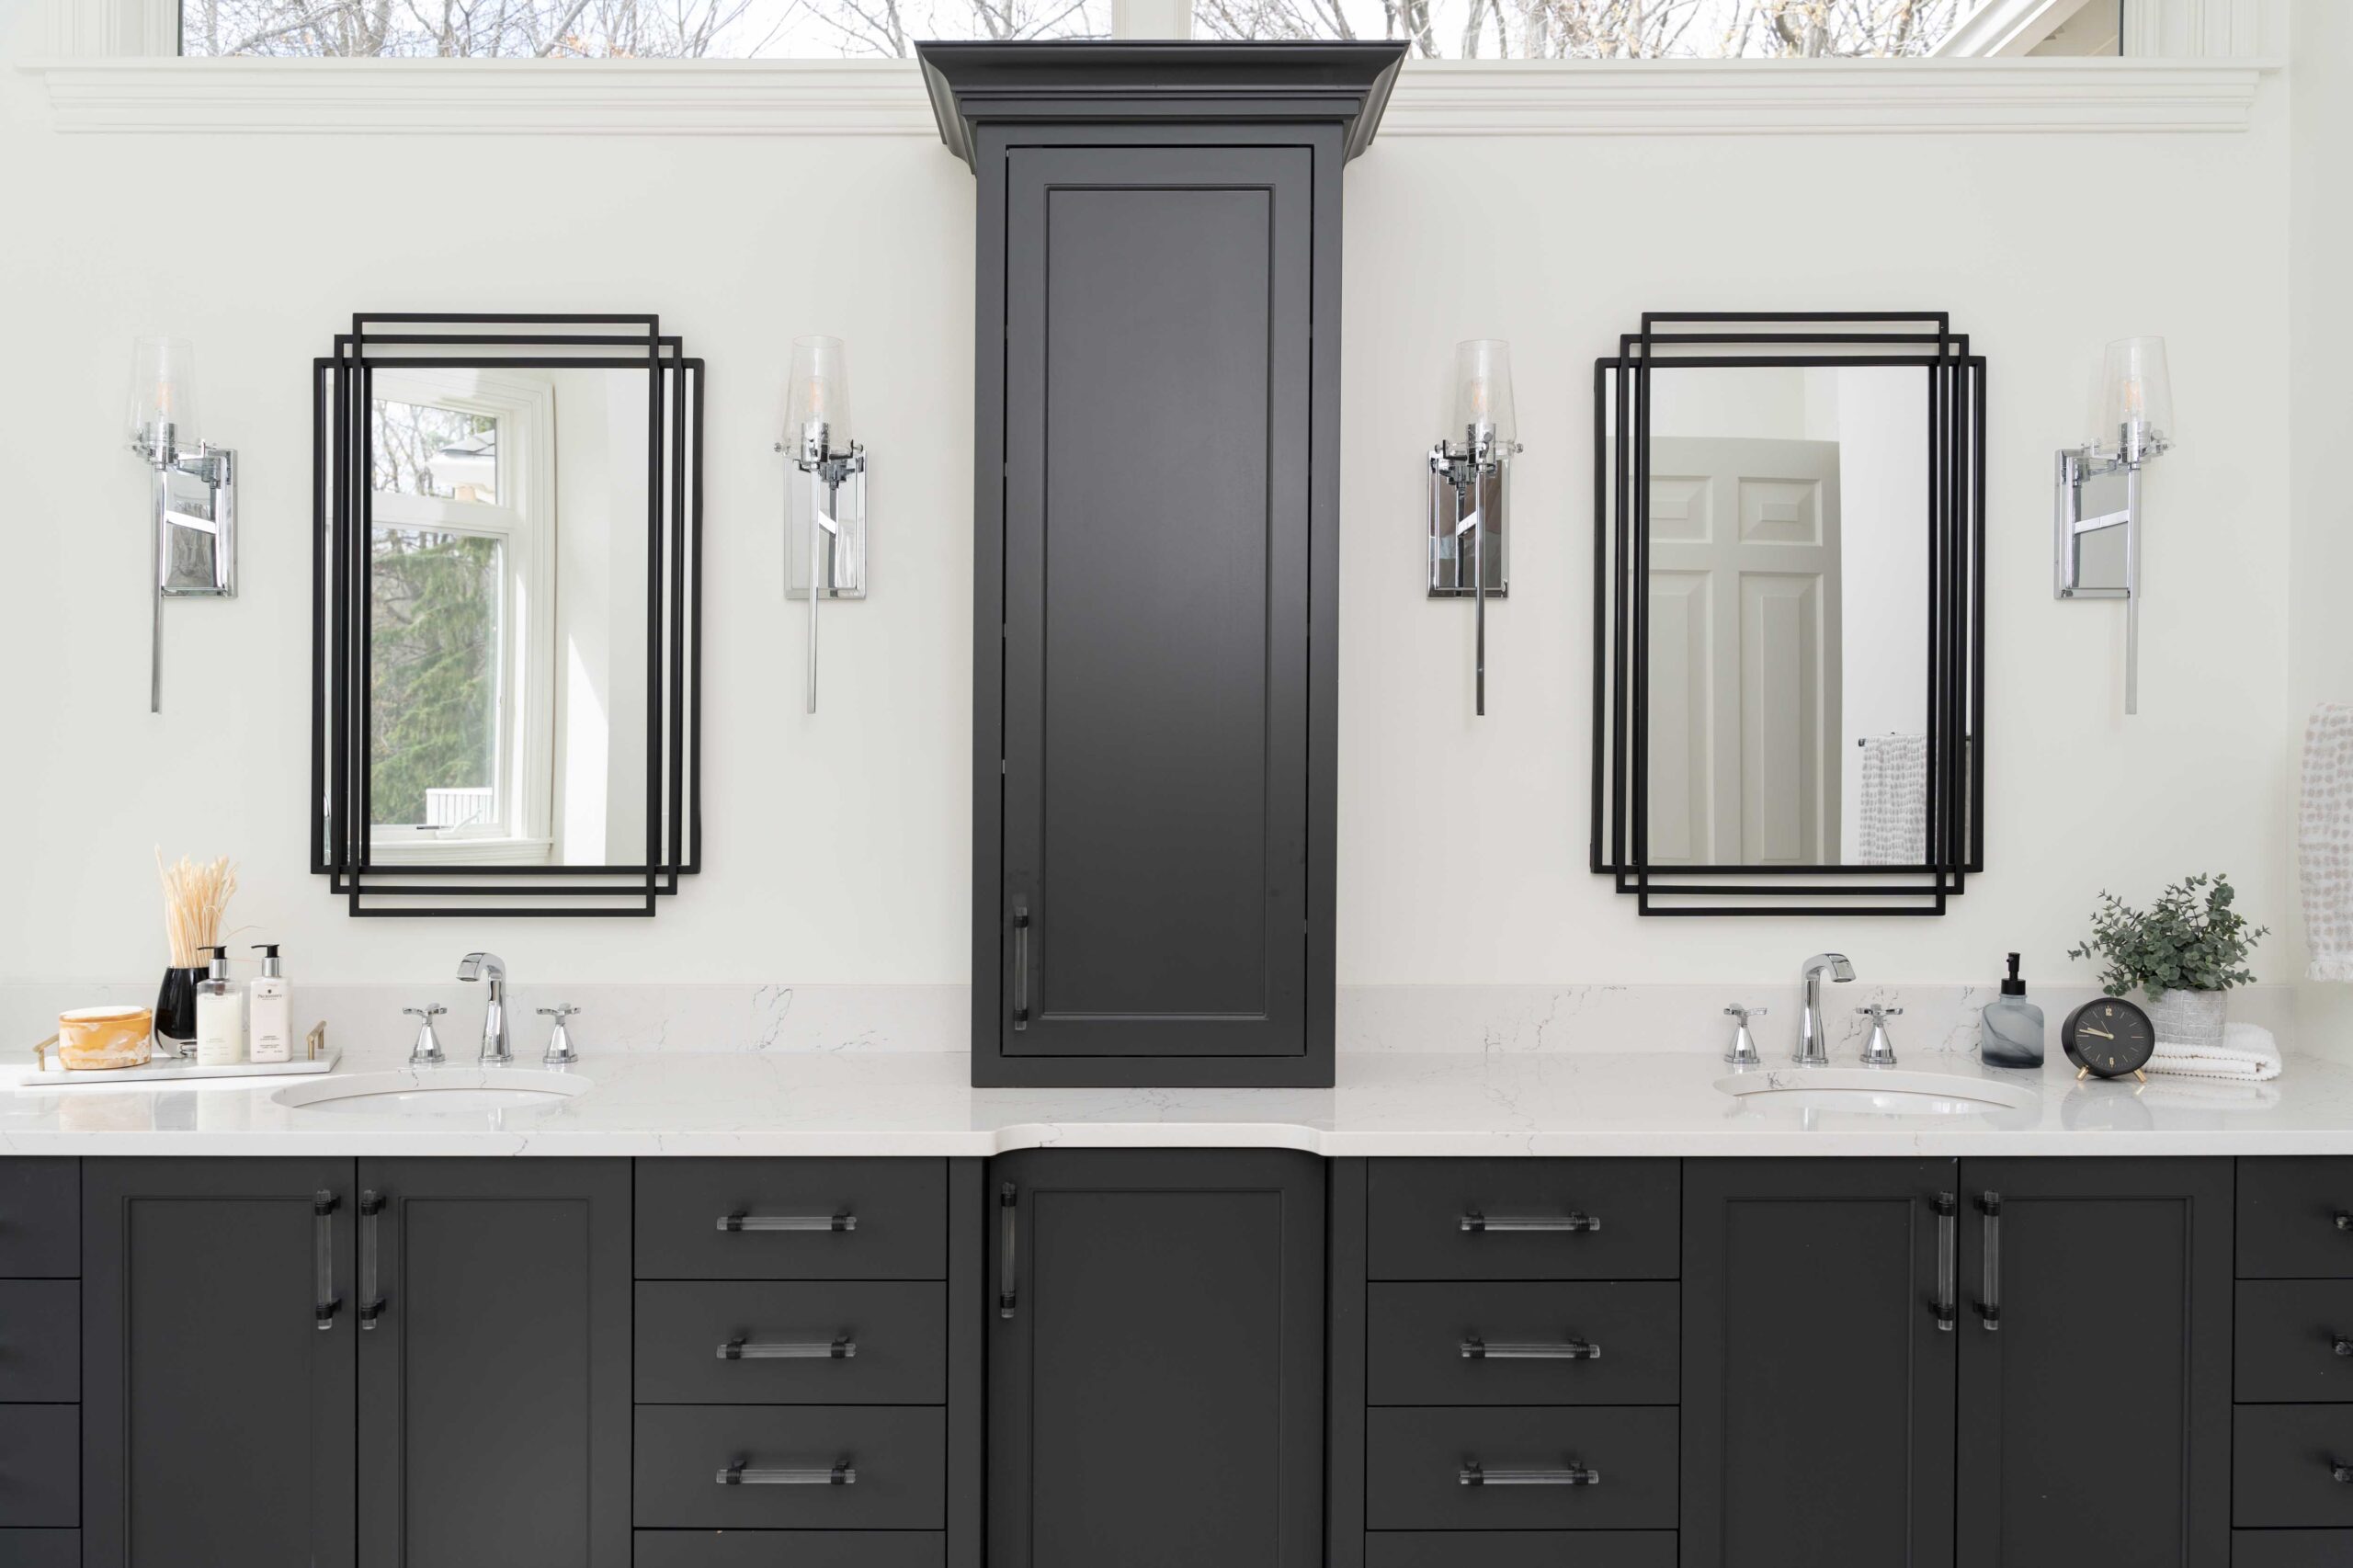 A modern bathroom remodel with black cabinets and mirrors.